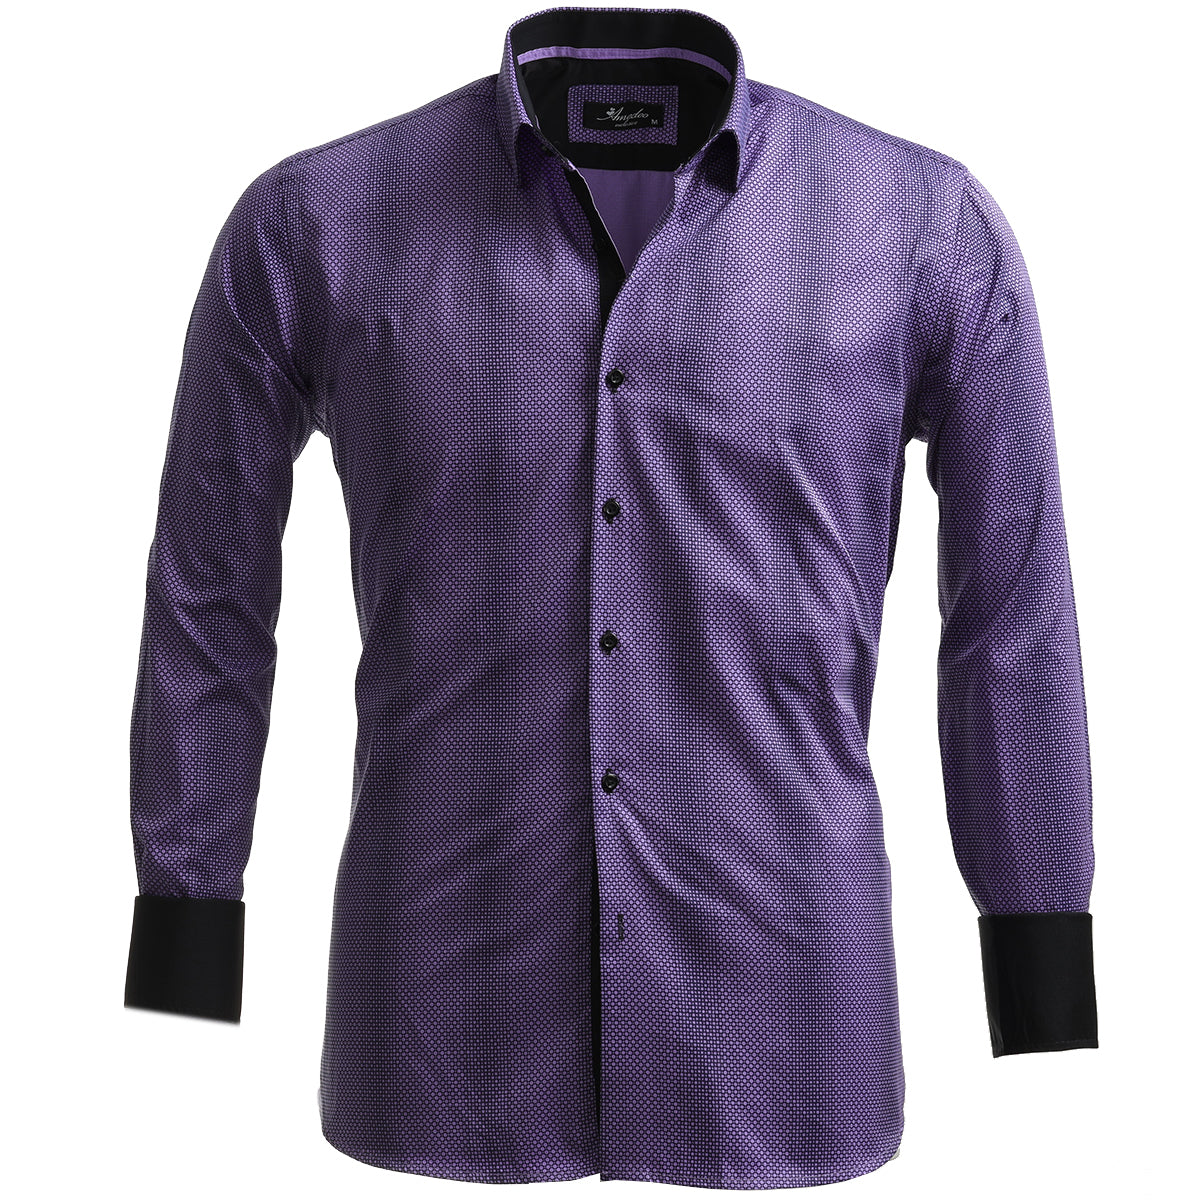 Purple Design Mens Slim Fit French Cuff Shirts with Cufflink Holes - Casual and Formal